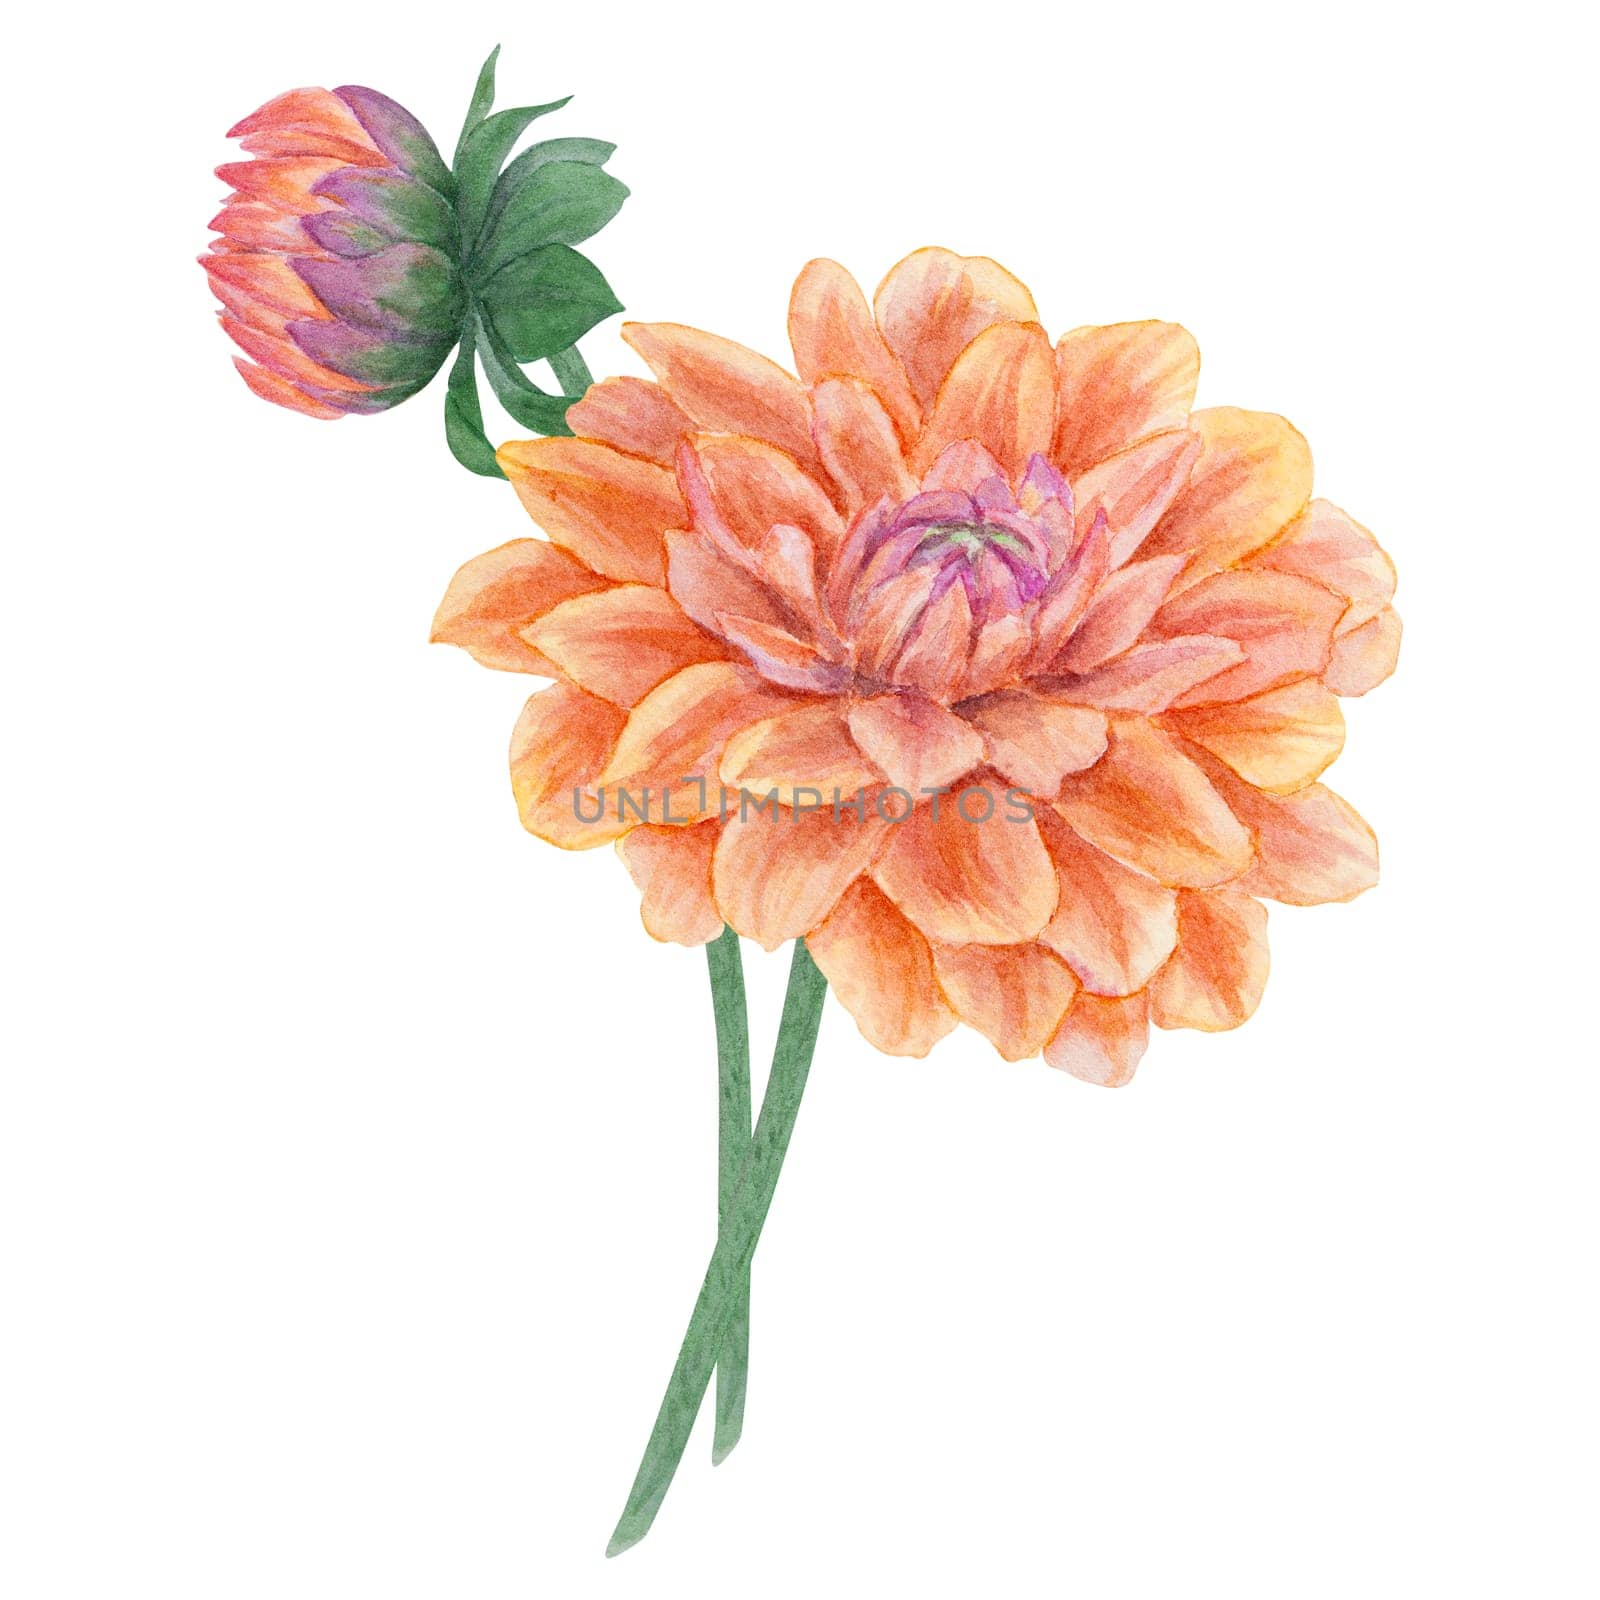 Garden orange dahlia watercolor illustration. Hand drawn botanical painting, floral sketch. Colorful flower clipart for summer or autumn design of wedding invitation, prints, greetings, sublimation, textile